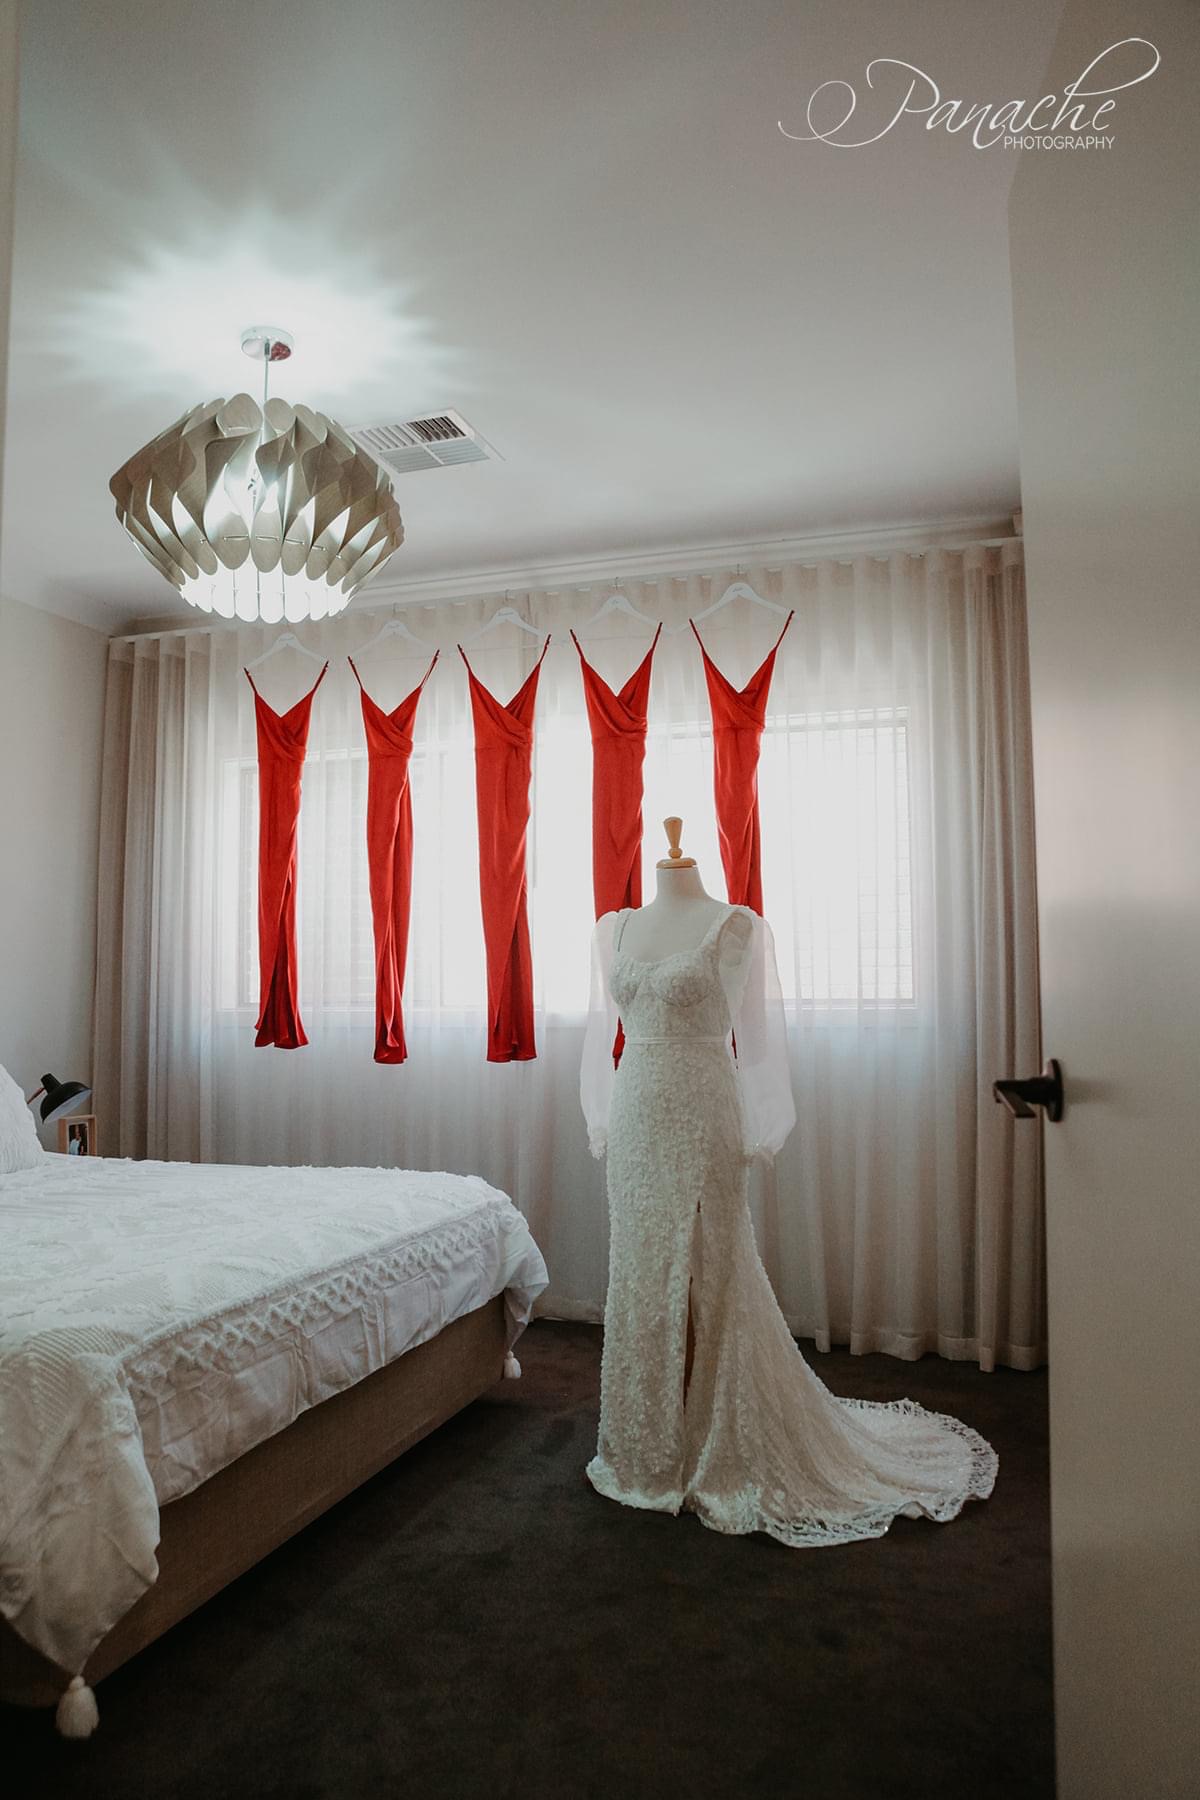 Cristiana's gown on a mannequin with red bridesmaids dresses hanging on a curtain rod in the background. Cristiana's gown is a slim mermaid gown in 3D flower embroidered tulle with an exposed corset cup bodice and detachable organza statement sleeves. 